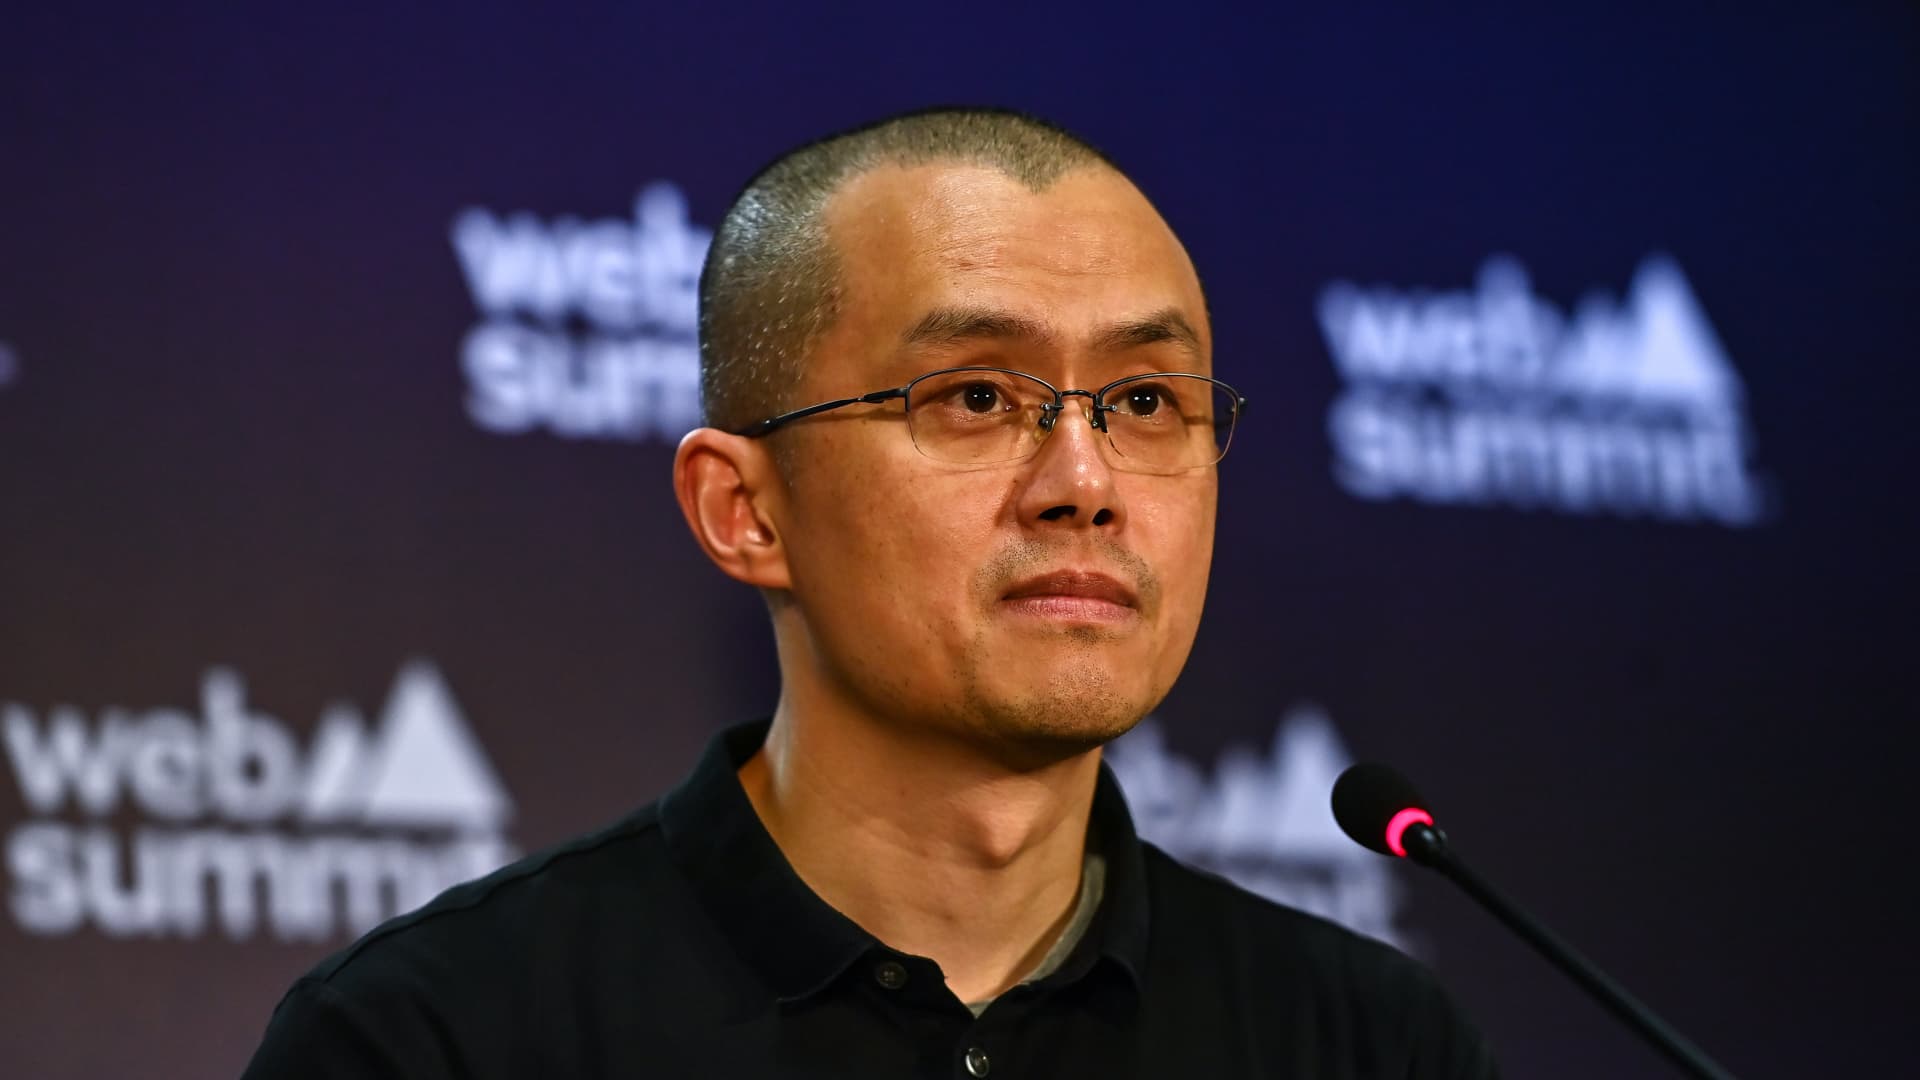 Binance and founder Changpeng Zhao violated compliance regulations to attract U.S. people, CFTC alleges